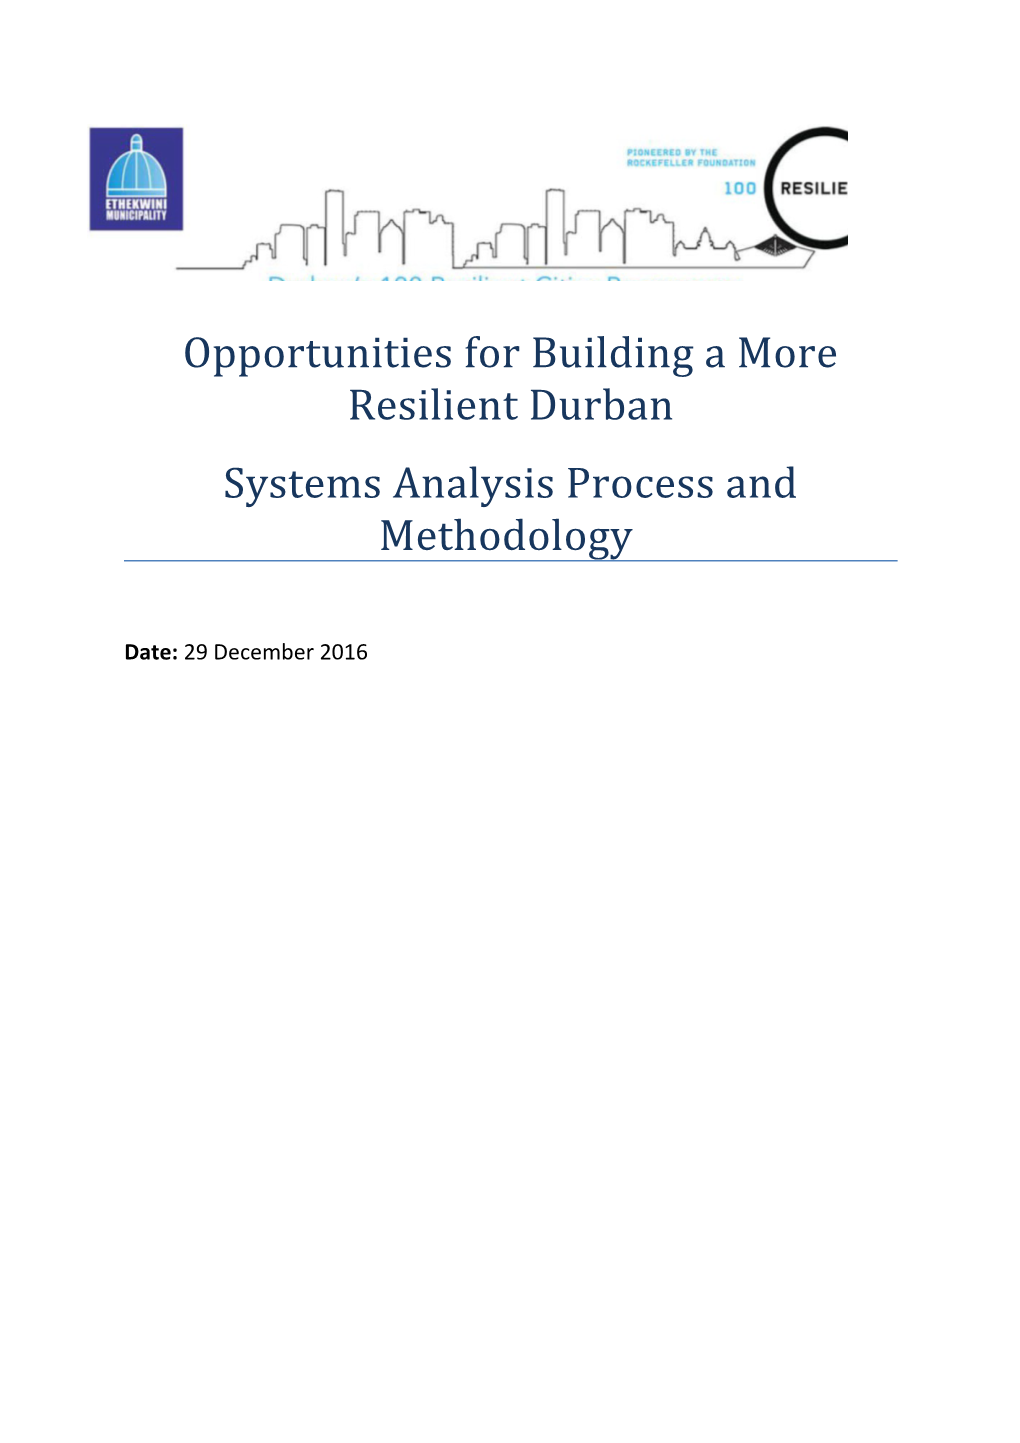 Opportunities for Building a More Resilient Durban